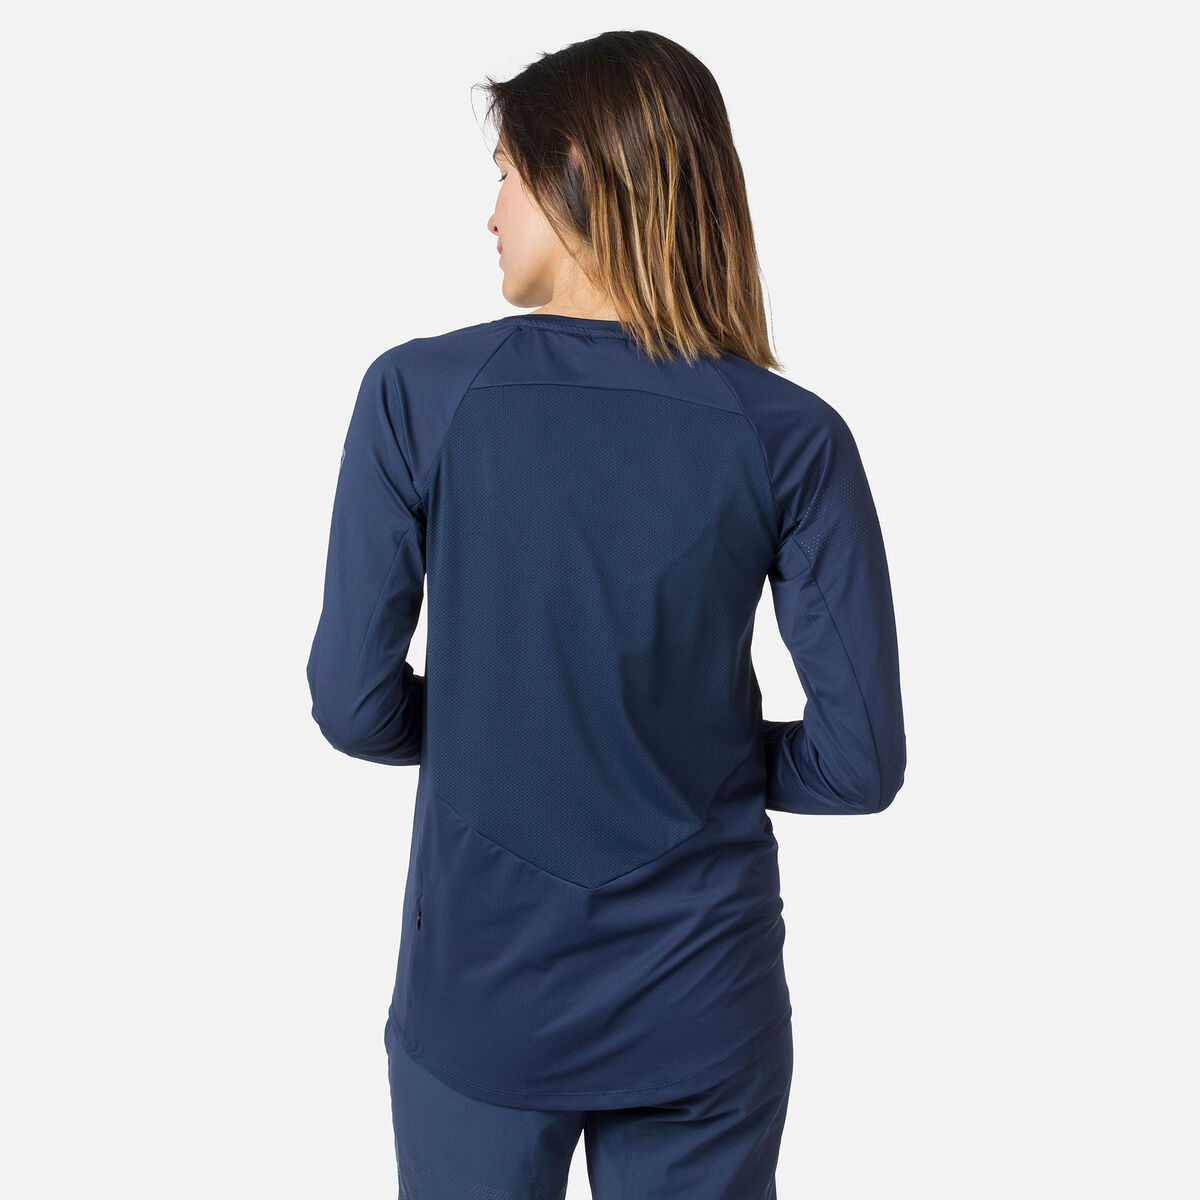 Women's long sleeve jersey relaxed fit